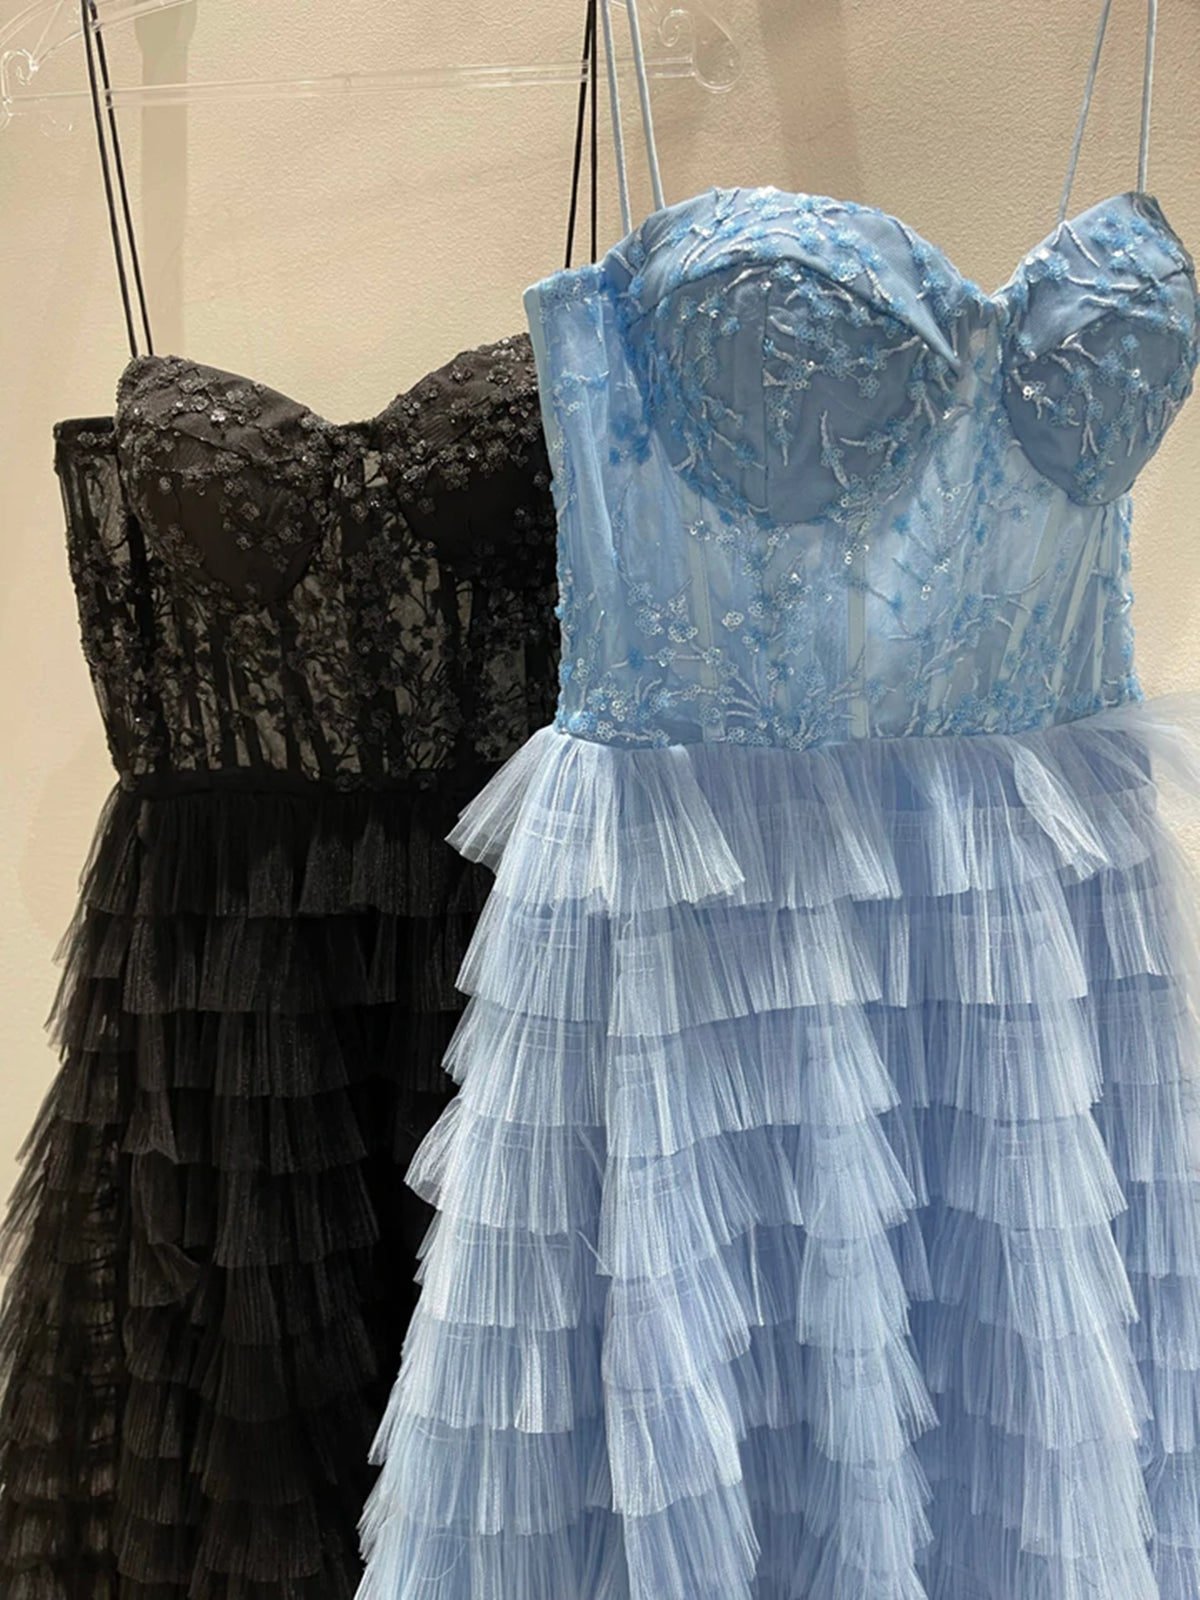 Stunning Strapless Ruffle Layered Blue/Black Lace Long Prom Dresses with High Slit, Blue/Black Lace Tulle Formal Evening Dresses 